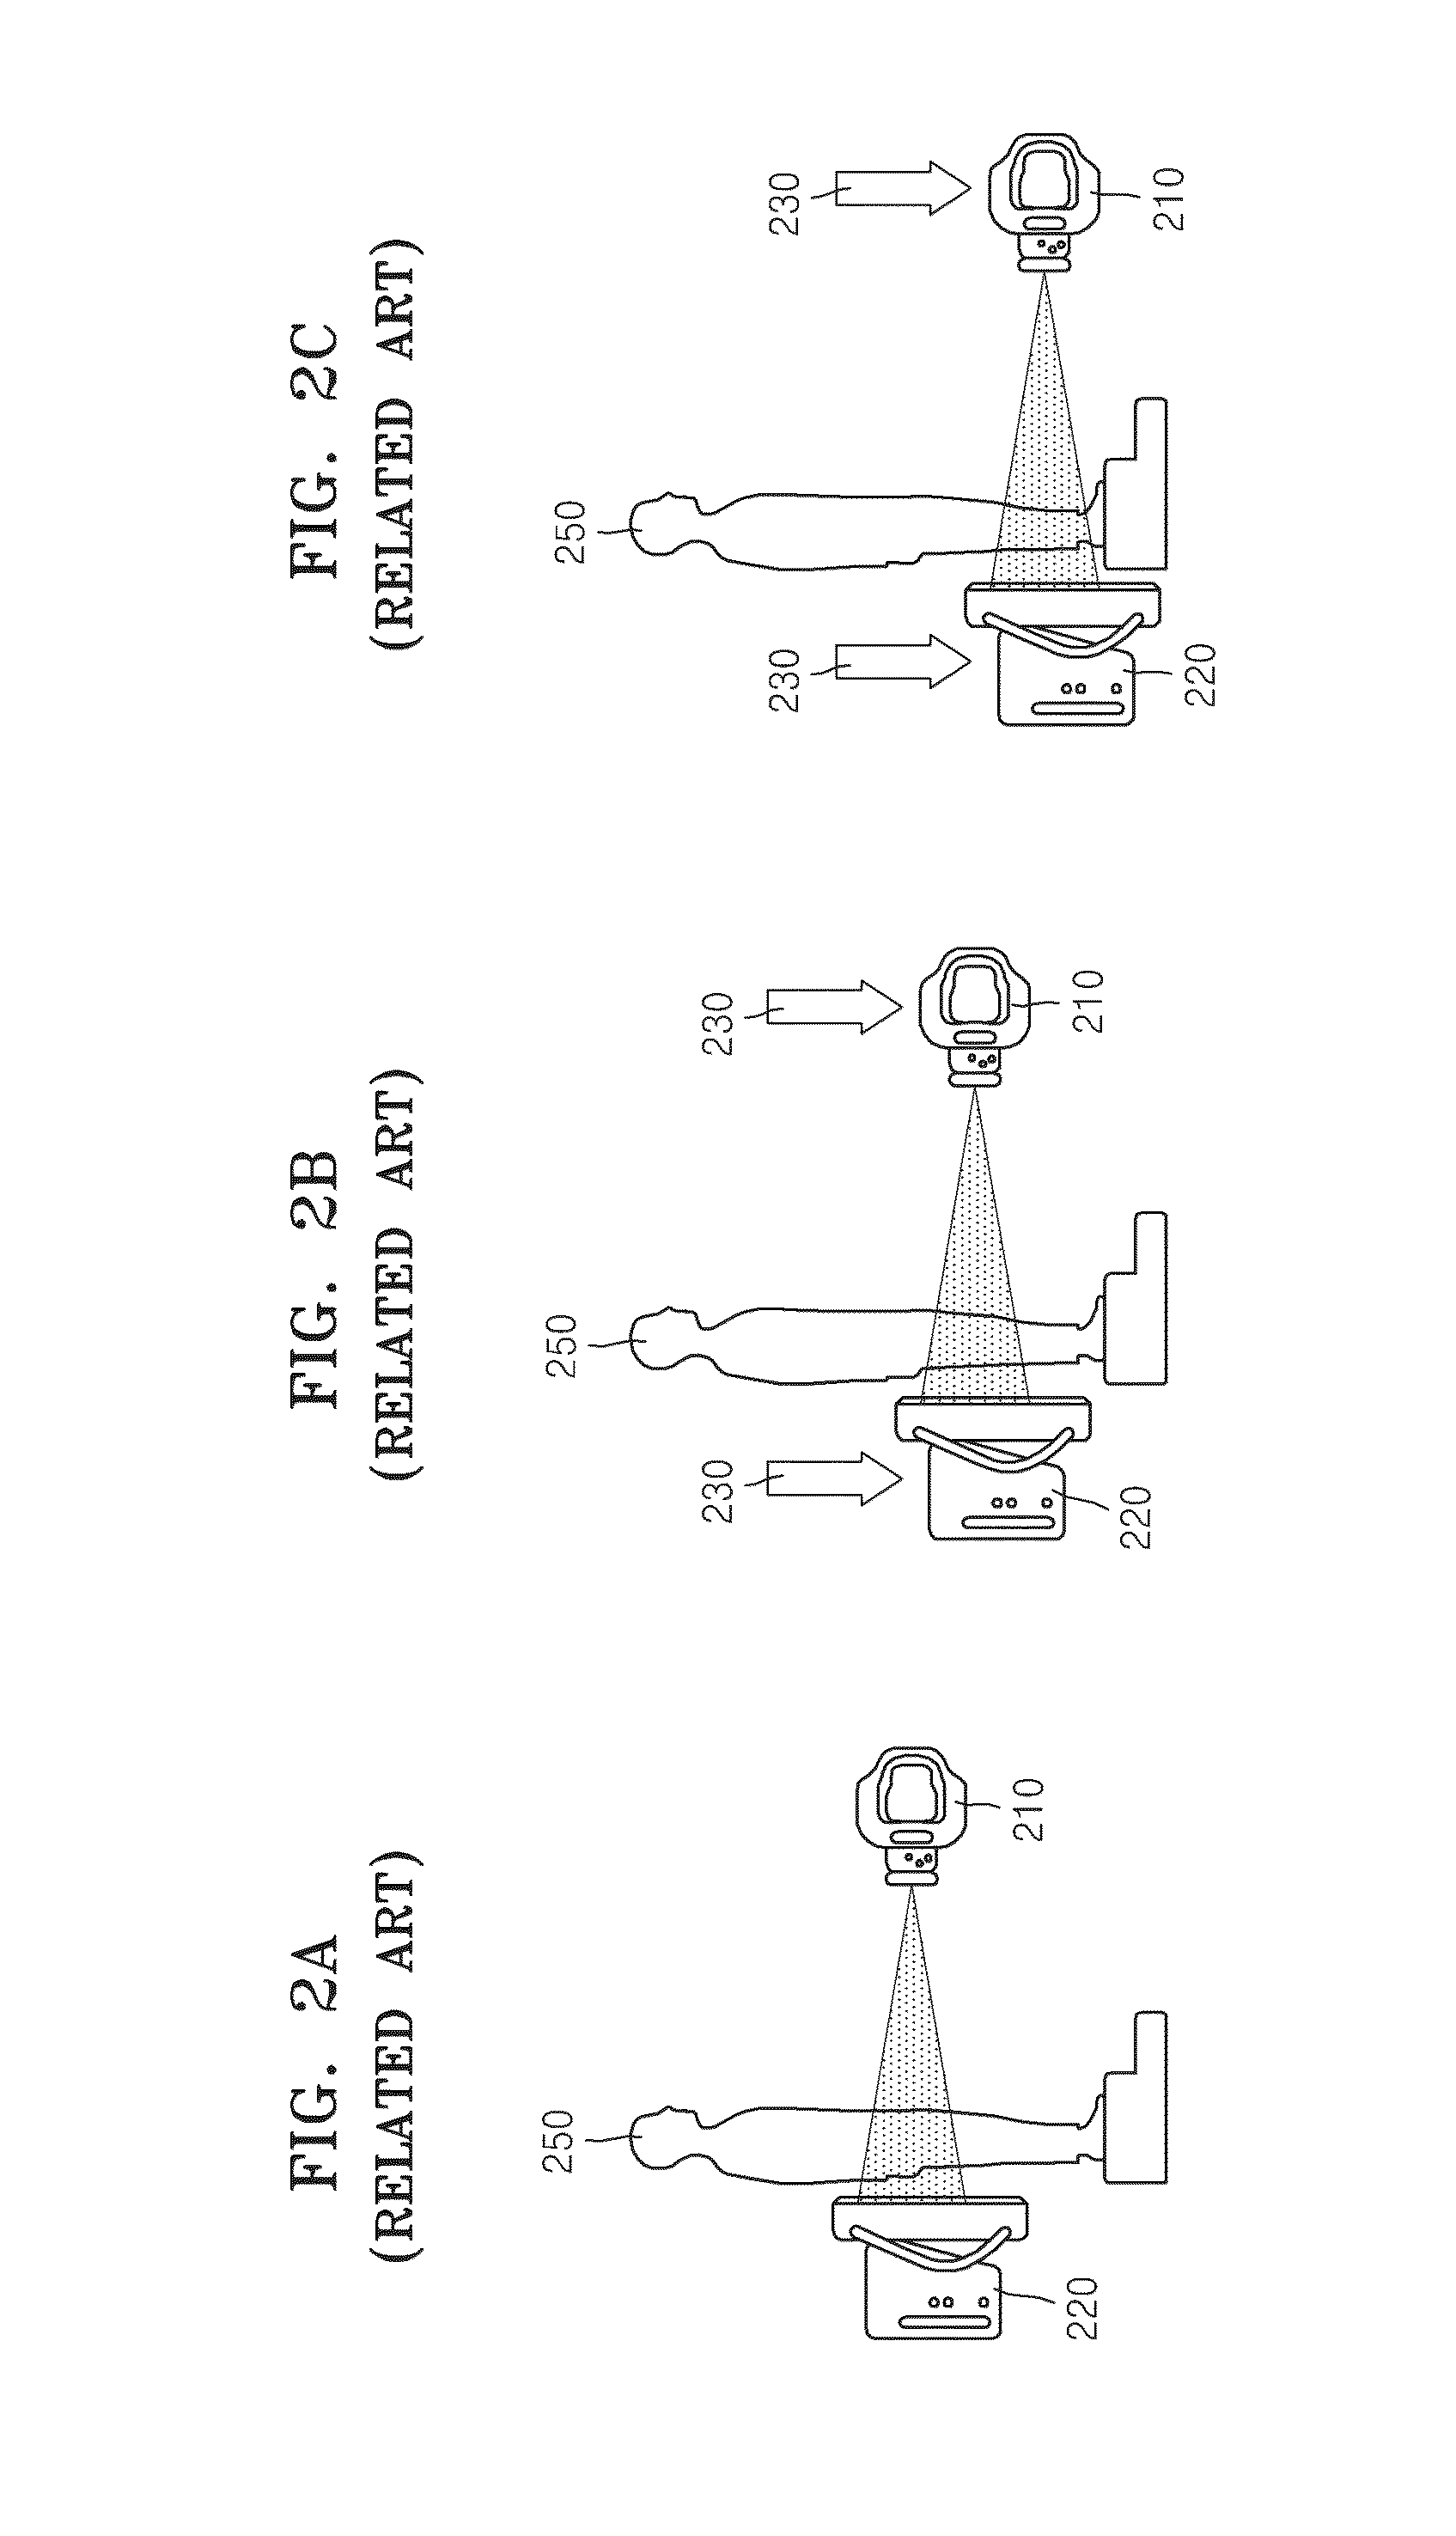 X-ray apparatus and method of obtaining x-ray image